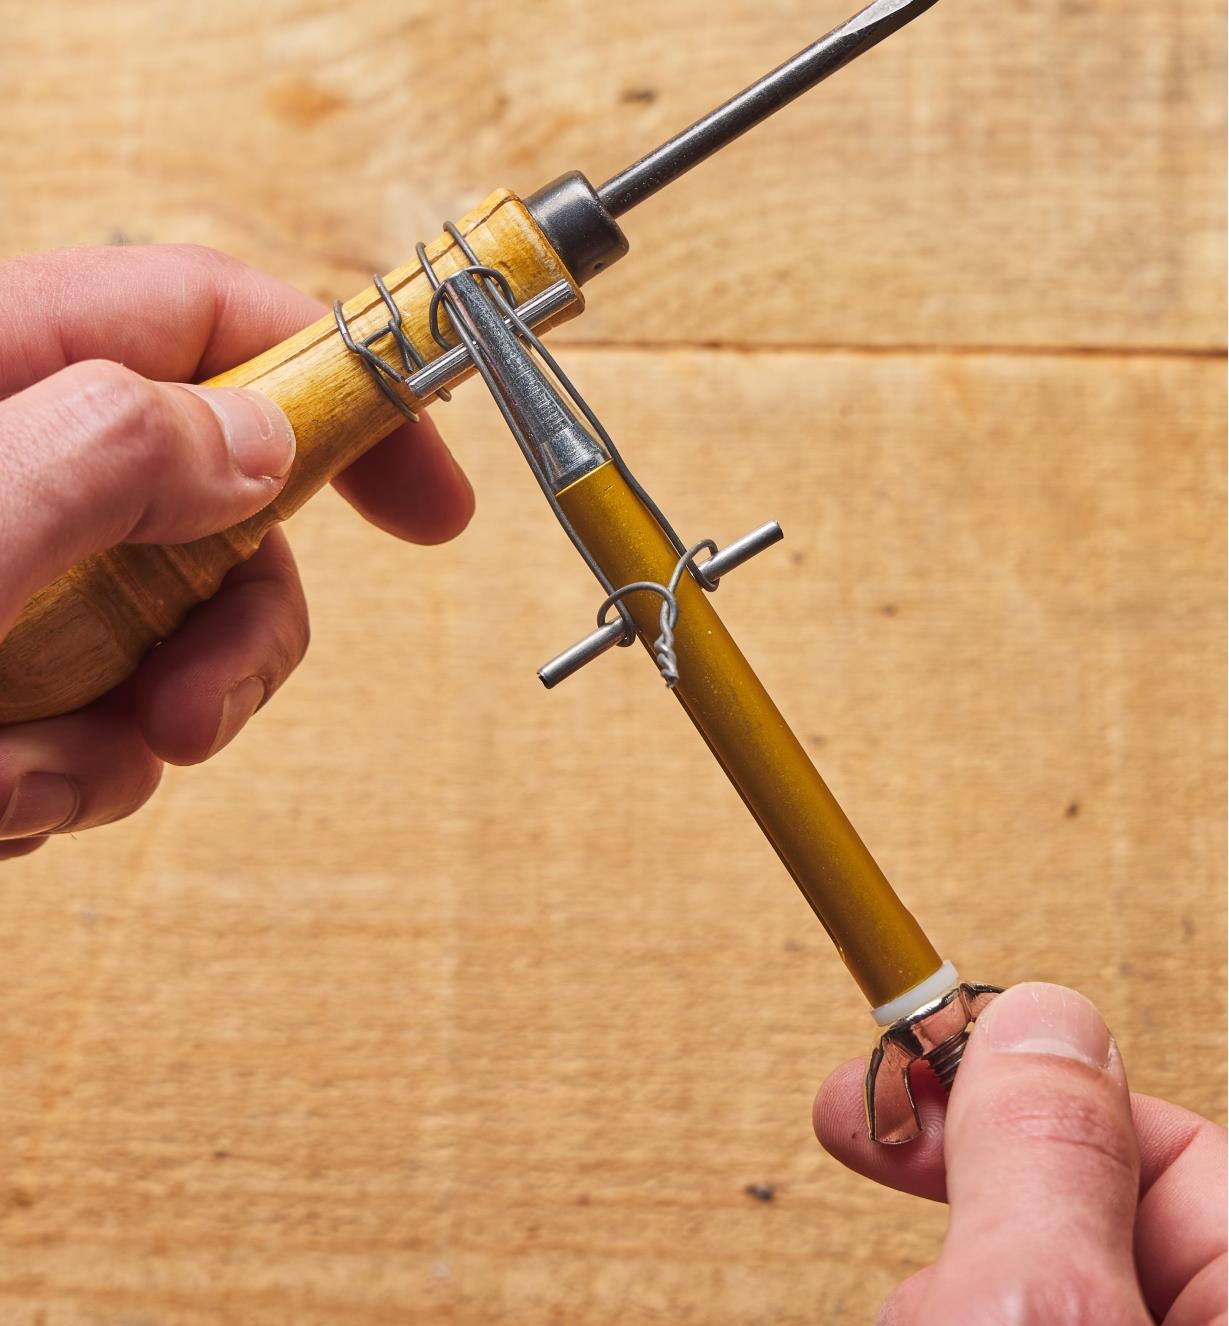 Wire is tightened around a cracked tool handle using the Clamptite Tool 